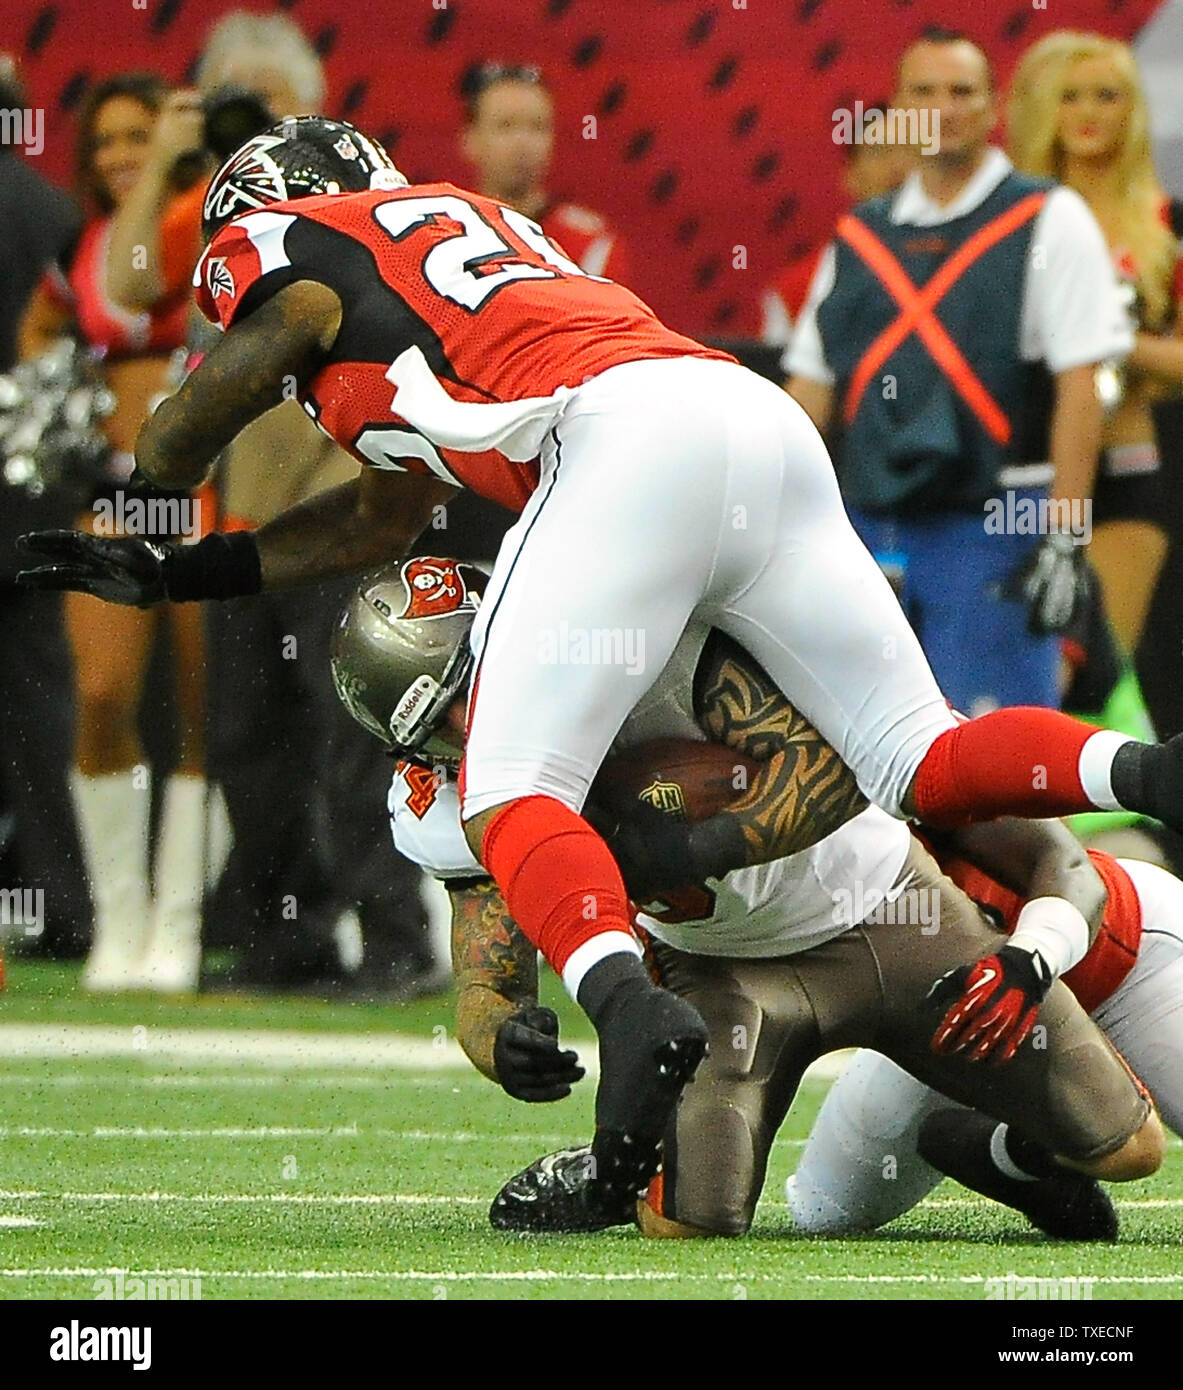 Atlanta Falcons defenders William Moore (25) and Joplo Bartu (R) stop Tampa  Bay Buccaneers' Tom Crabtree (84) during the first half at the Georgia Dome  in Atlanta on October 20, 2013. Crabtree